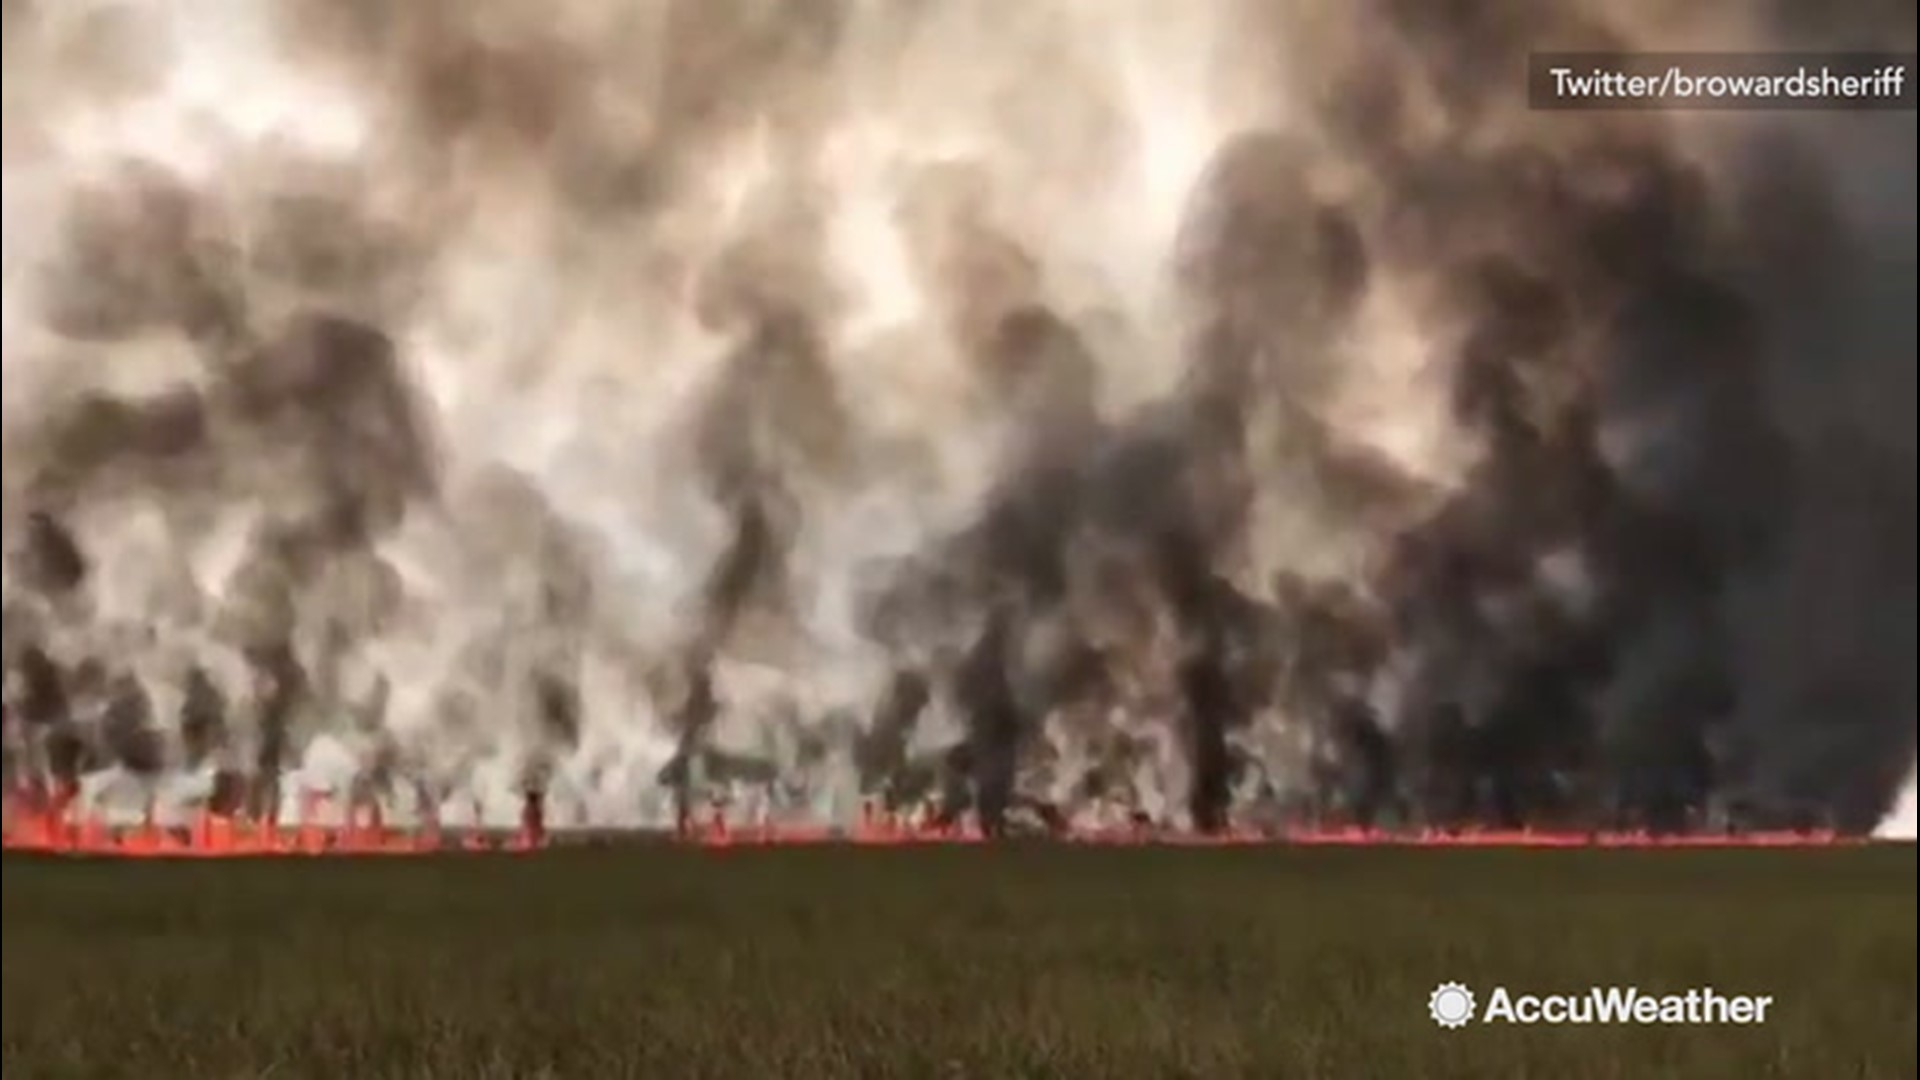 On Tuesday, June 25, lightning struck the Everglades in Broward County, Florida and caused a brush fire that consumed an estimated 31,500 acres of sawgrass.